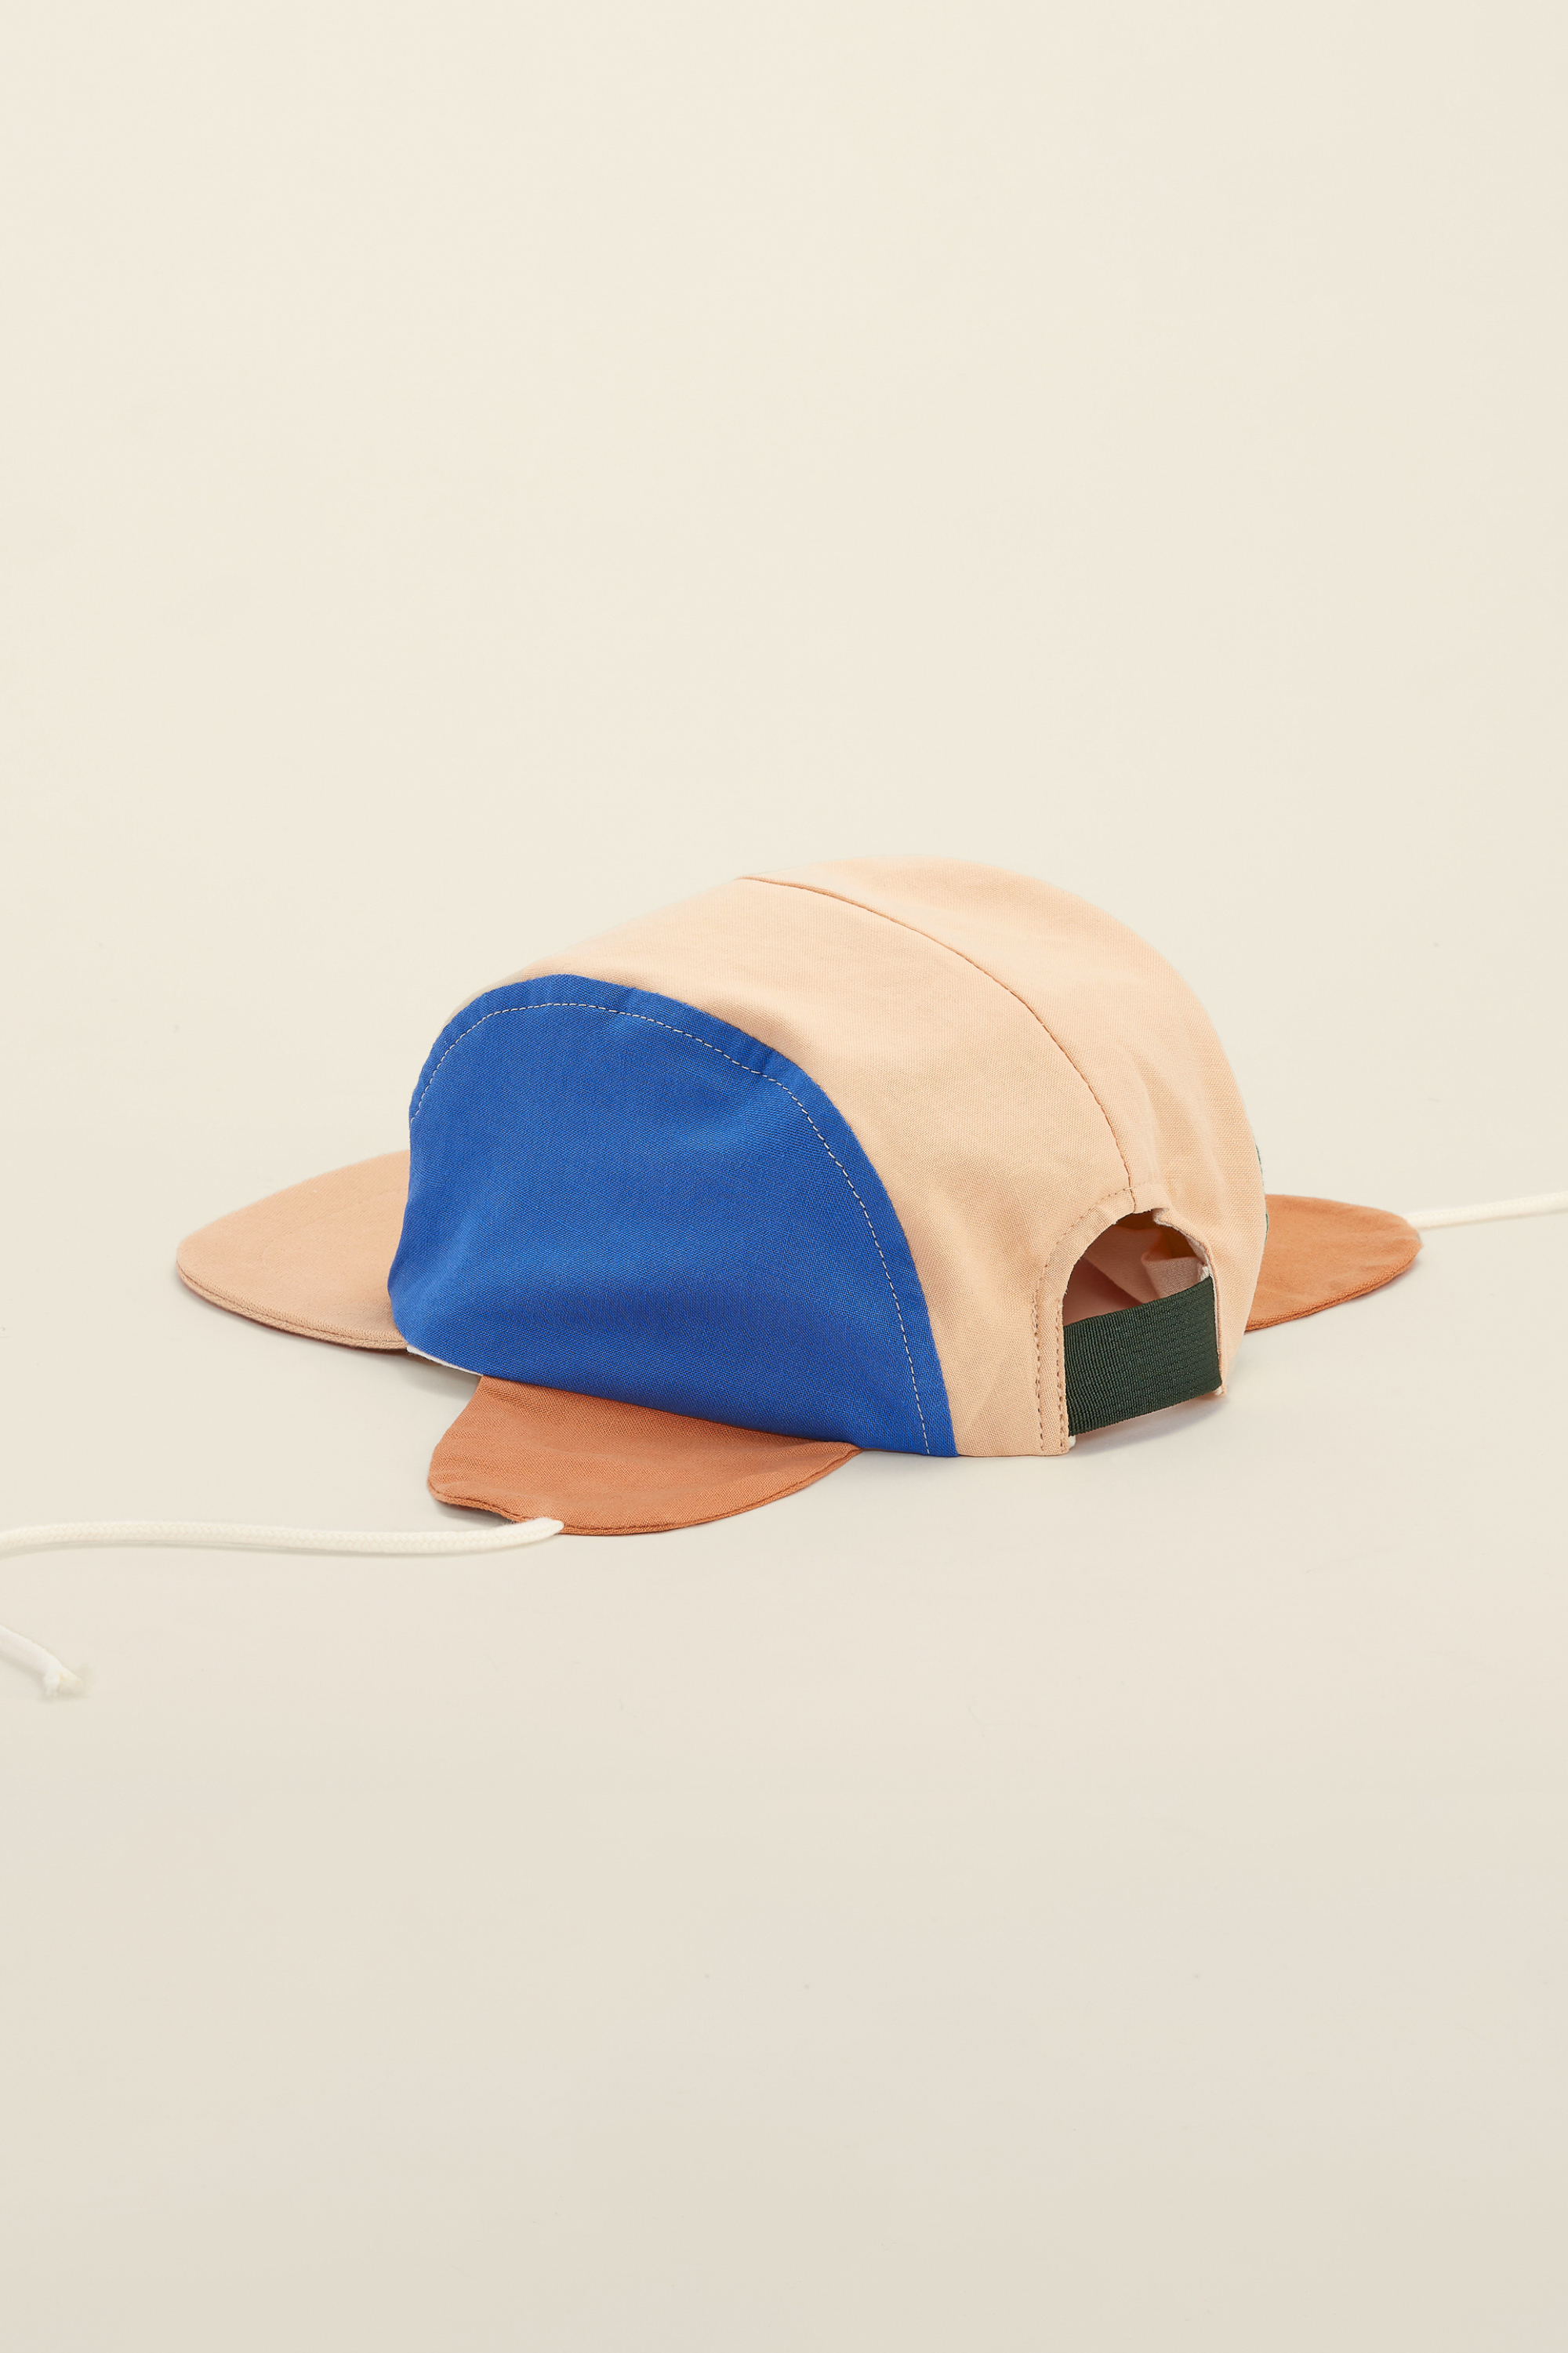 NKitH Cap 'Wolly - 5 Panel Colorblock'